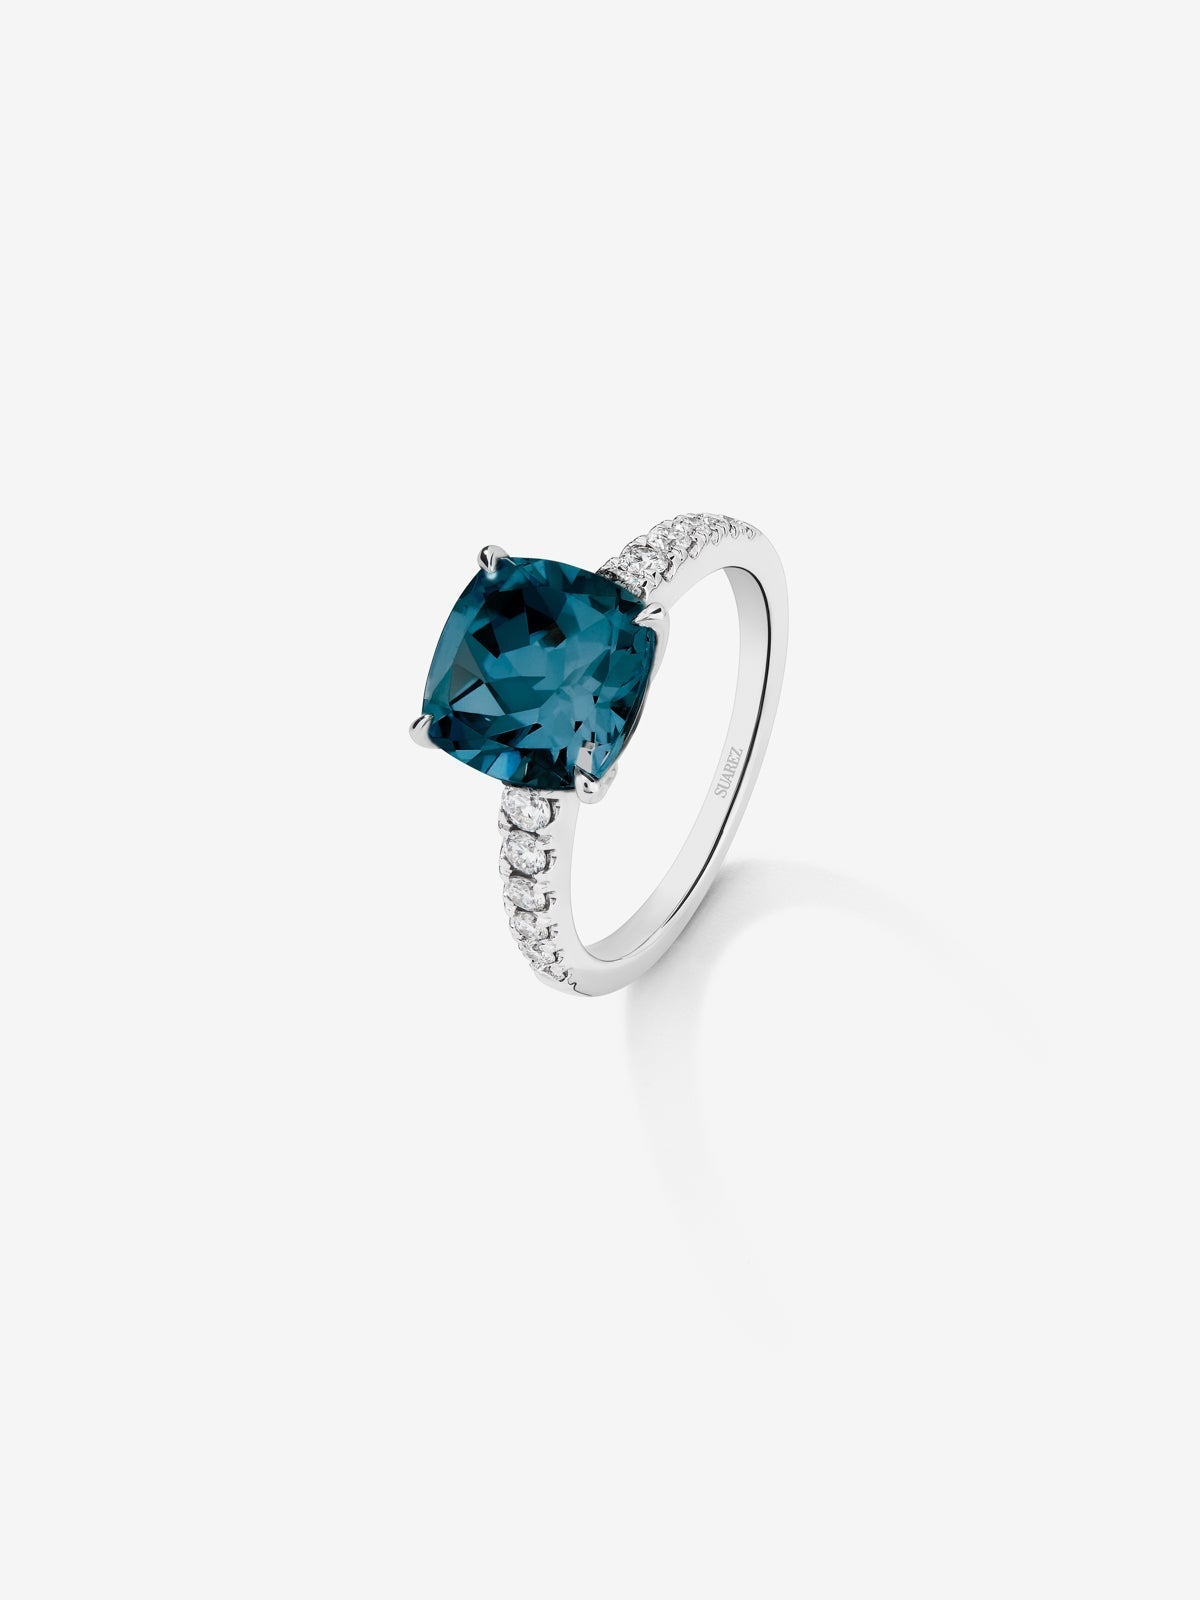 18K white gold ring with cushion-cut London blue topaz of 3.8 cts and 12 brilliant-cut diamonds with a total of 0.29 cts